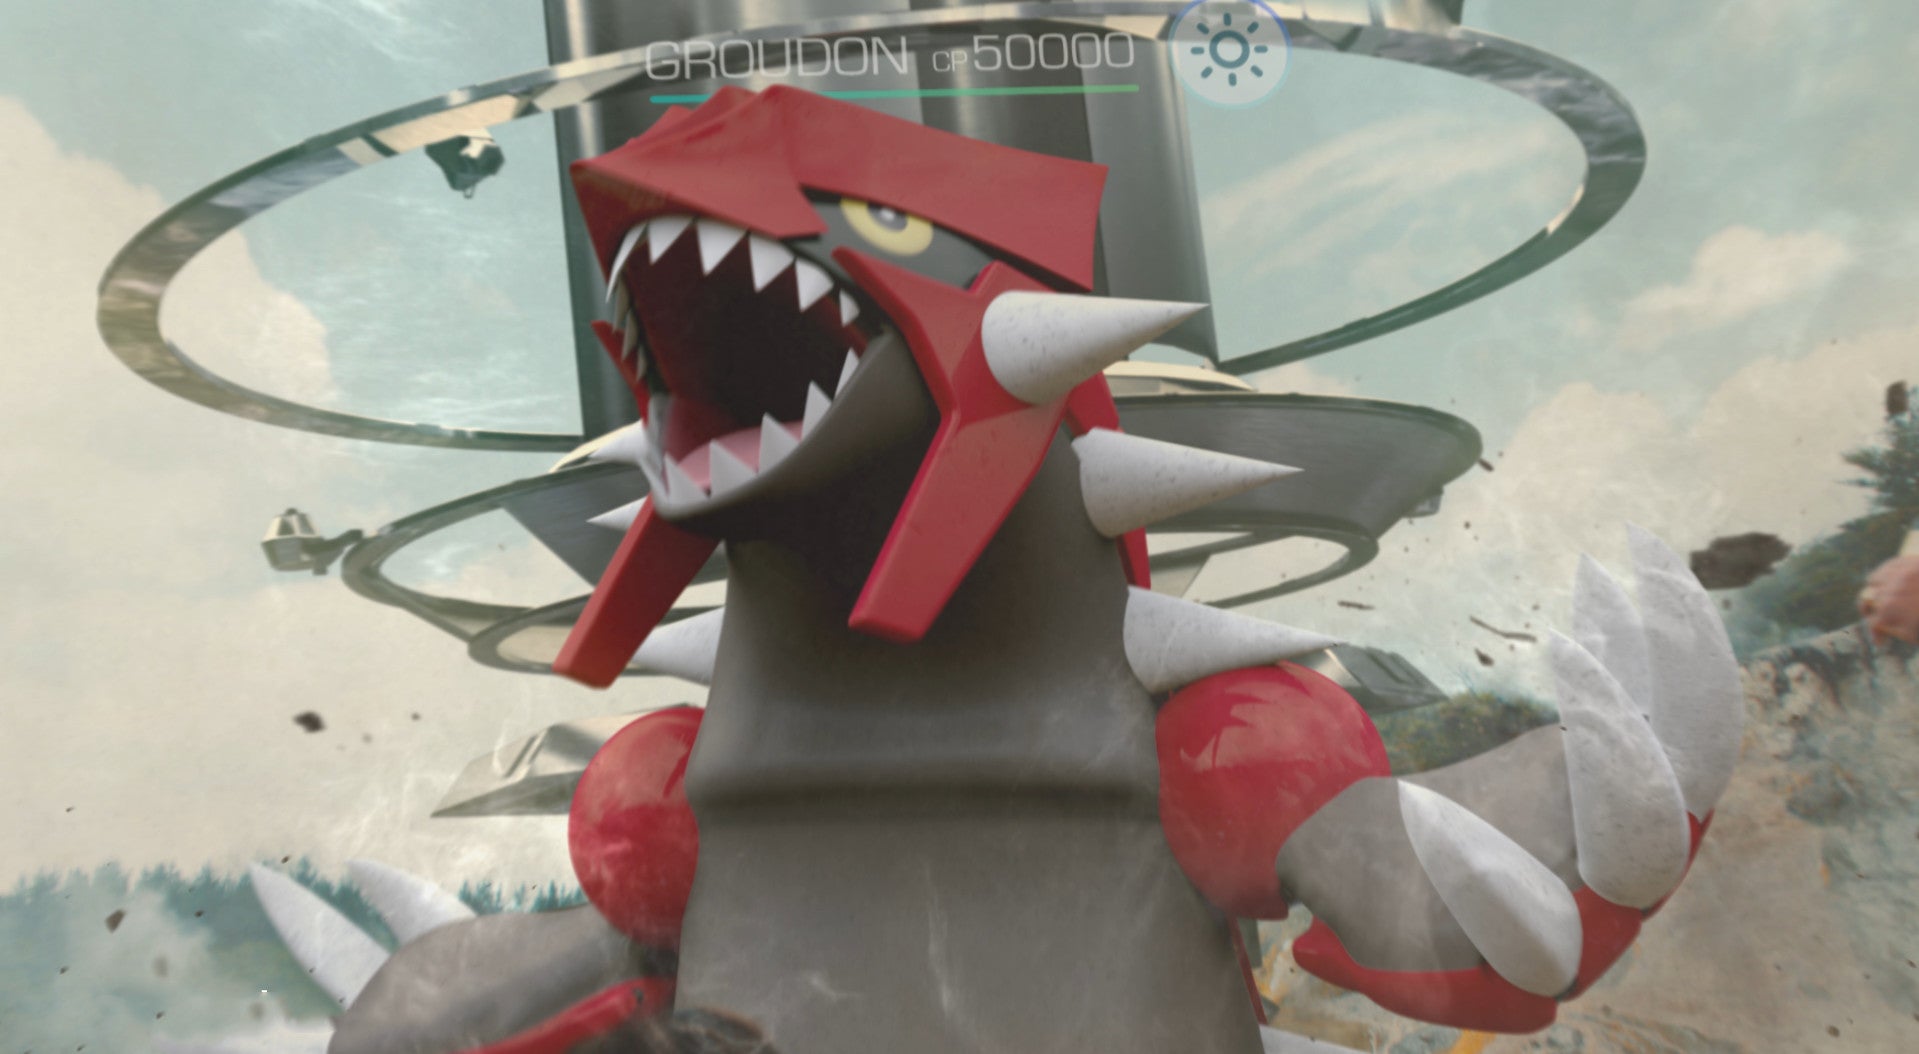 Pokemon GO gets its first Generation 3 Legendary Pokemon, but only for a limited time